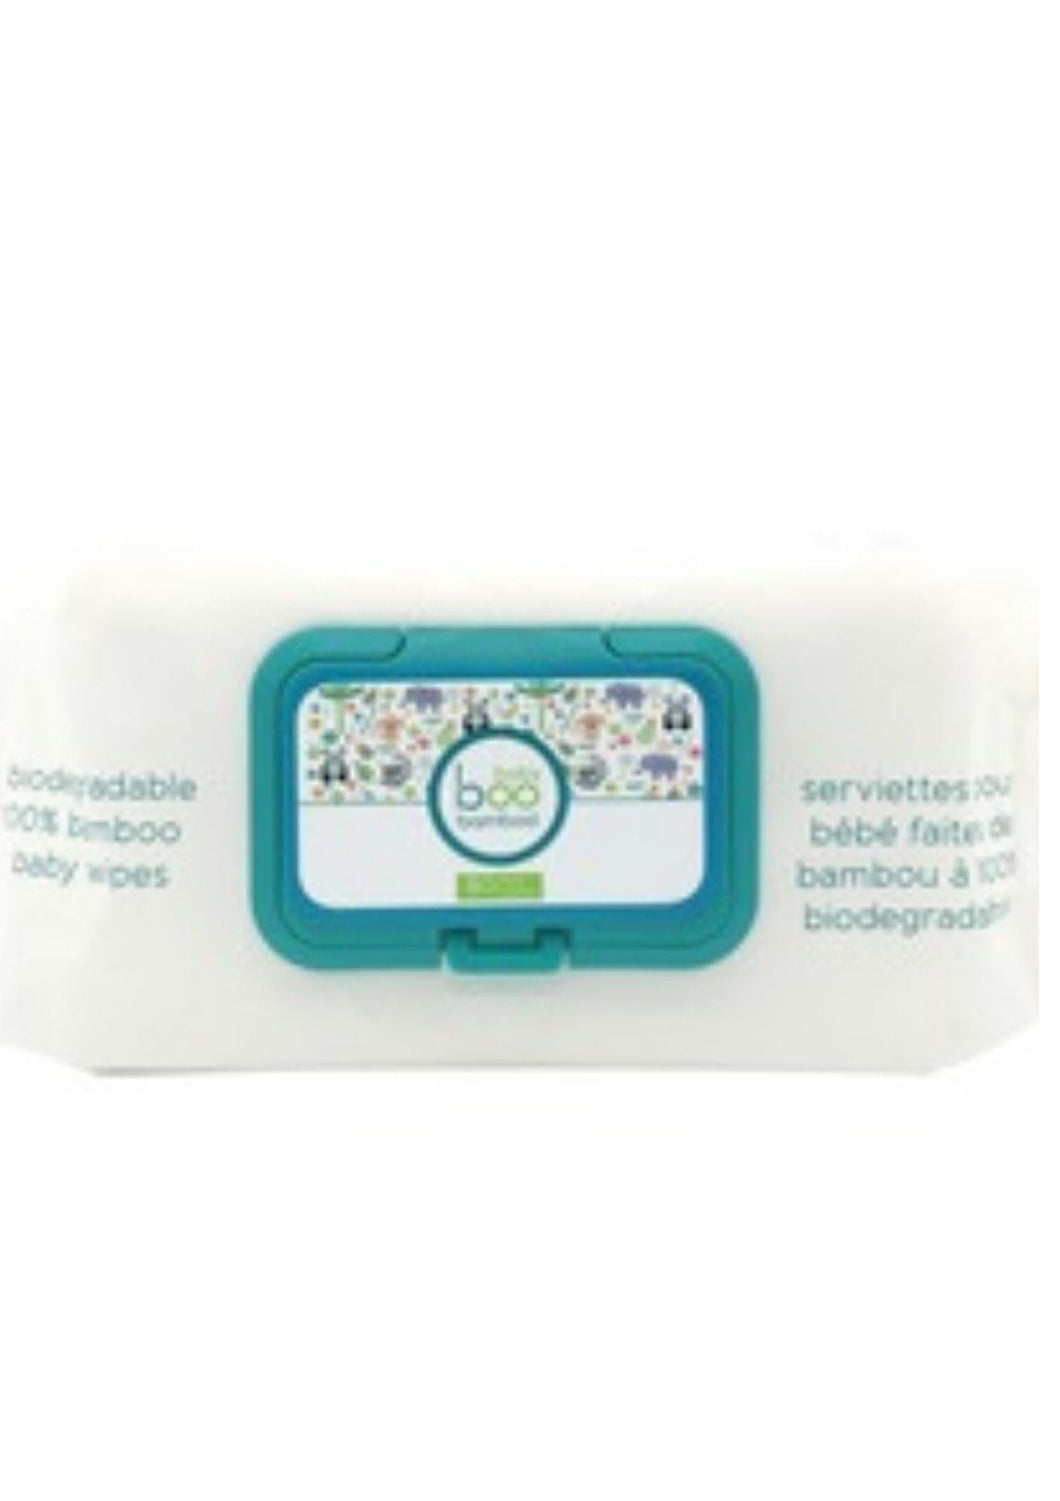 boo bamboo's 100% Biodegradable Bamboo Baby Wipes are made of ultra-soft, eco-friendly, 100% unbleached bamboo cloth. They safely and gently cleanse Baby’s face and body using the highest-quality natural ingredients and are enriched with organic bamboo extract and Vitamin E to help strengthen and soothe even the most sensitive newborn skin.  $8.00